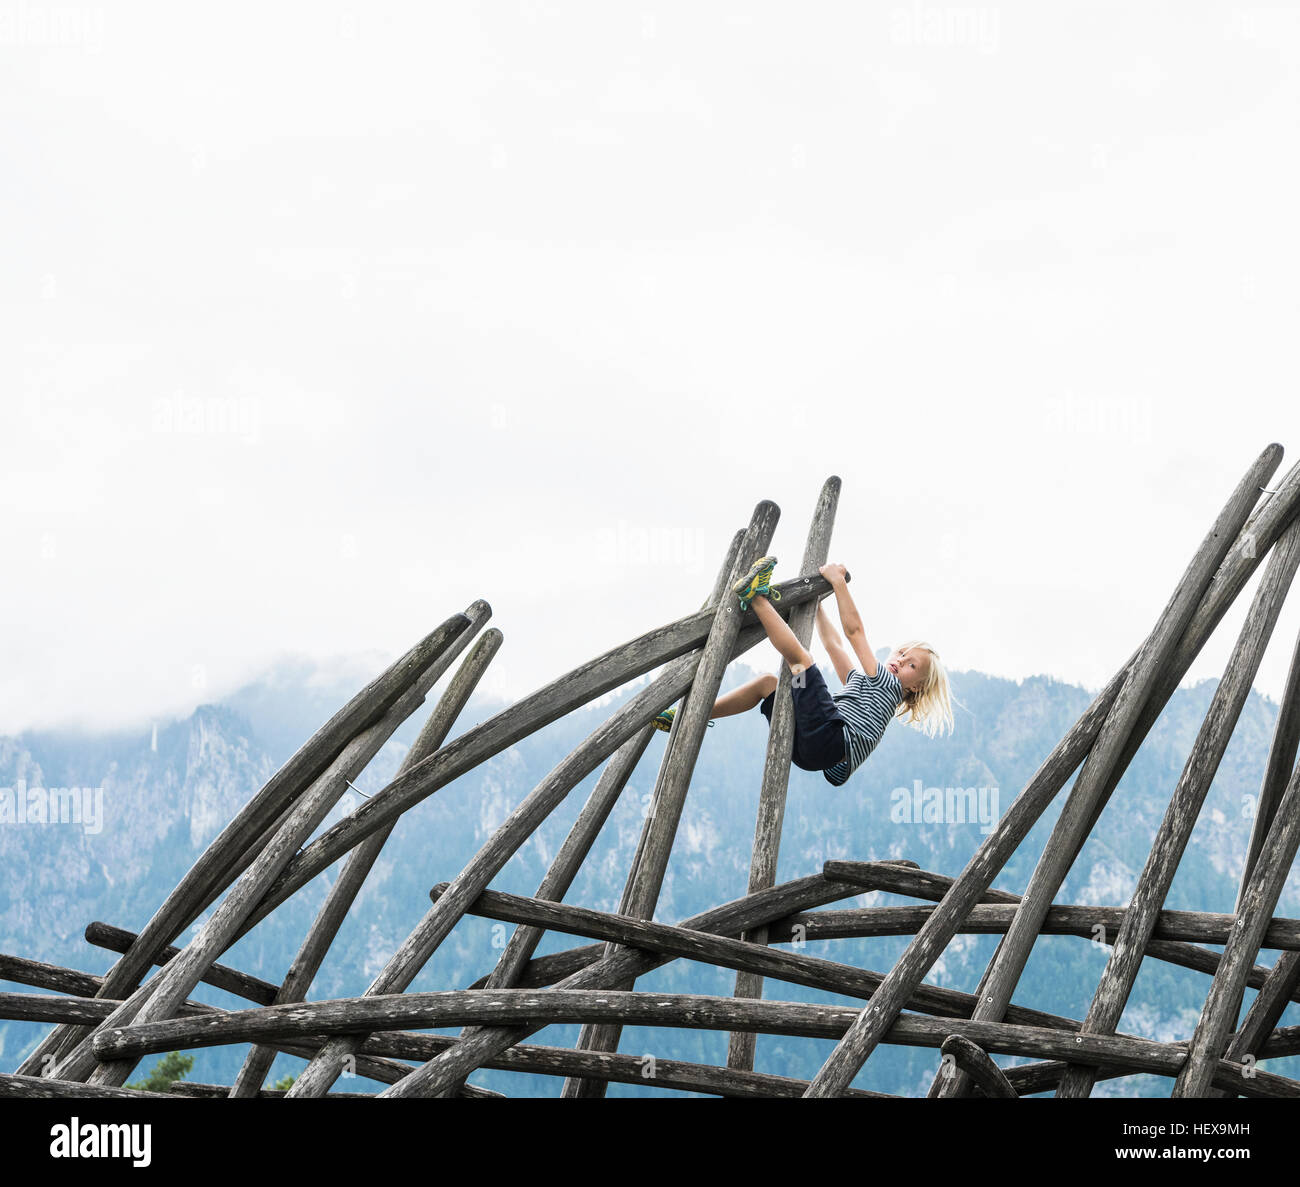 Boy climbing wooden structure in playground, Fuessen, Bavaria, Germany Stock Photo